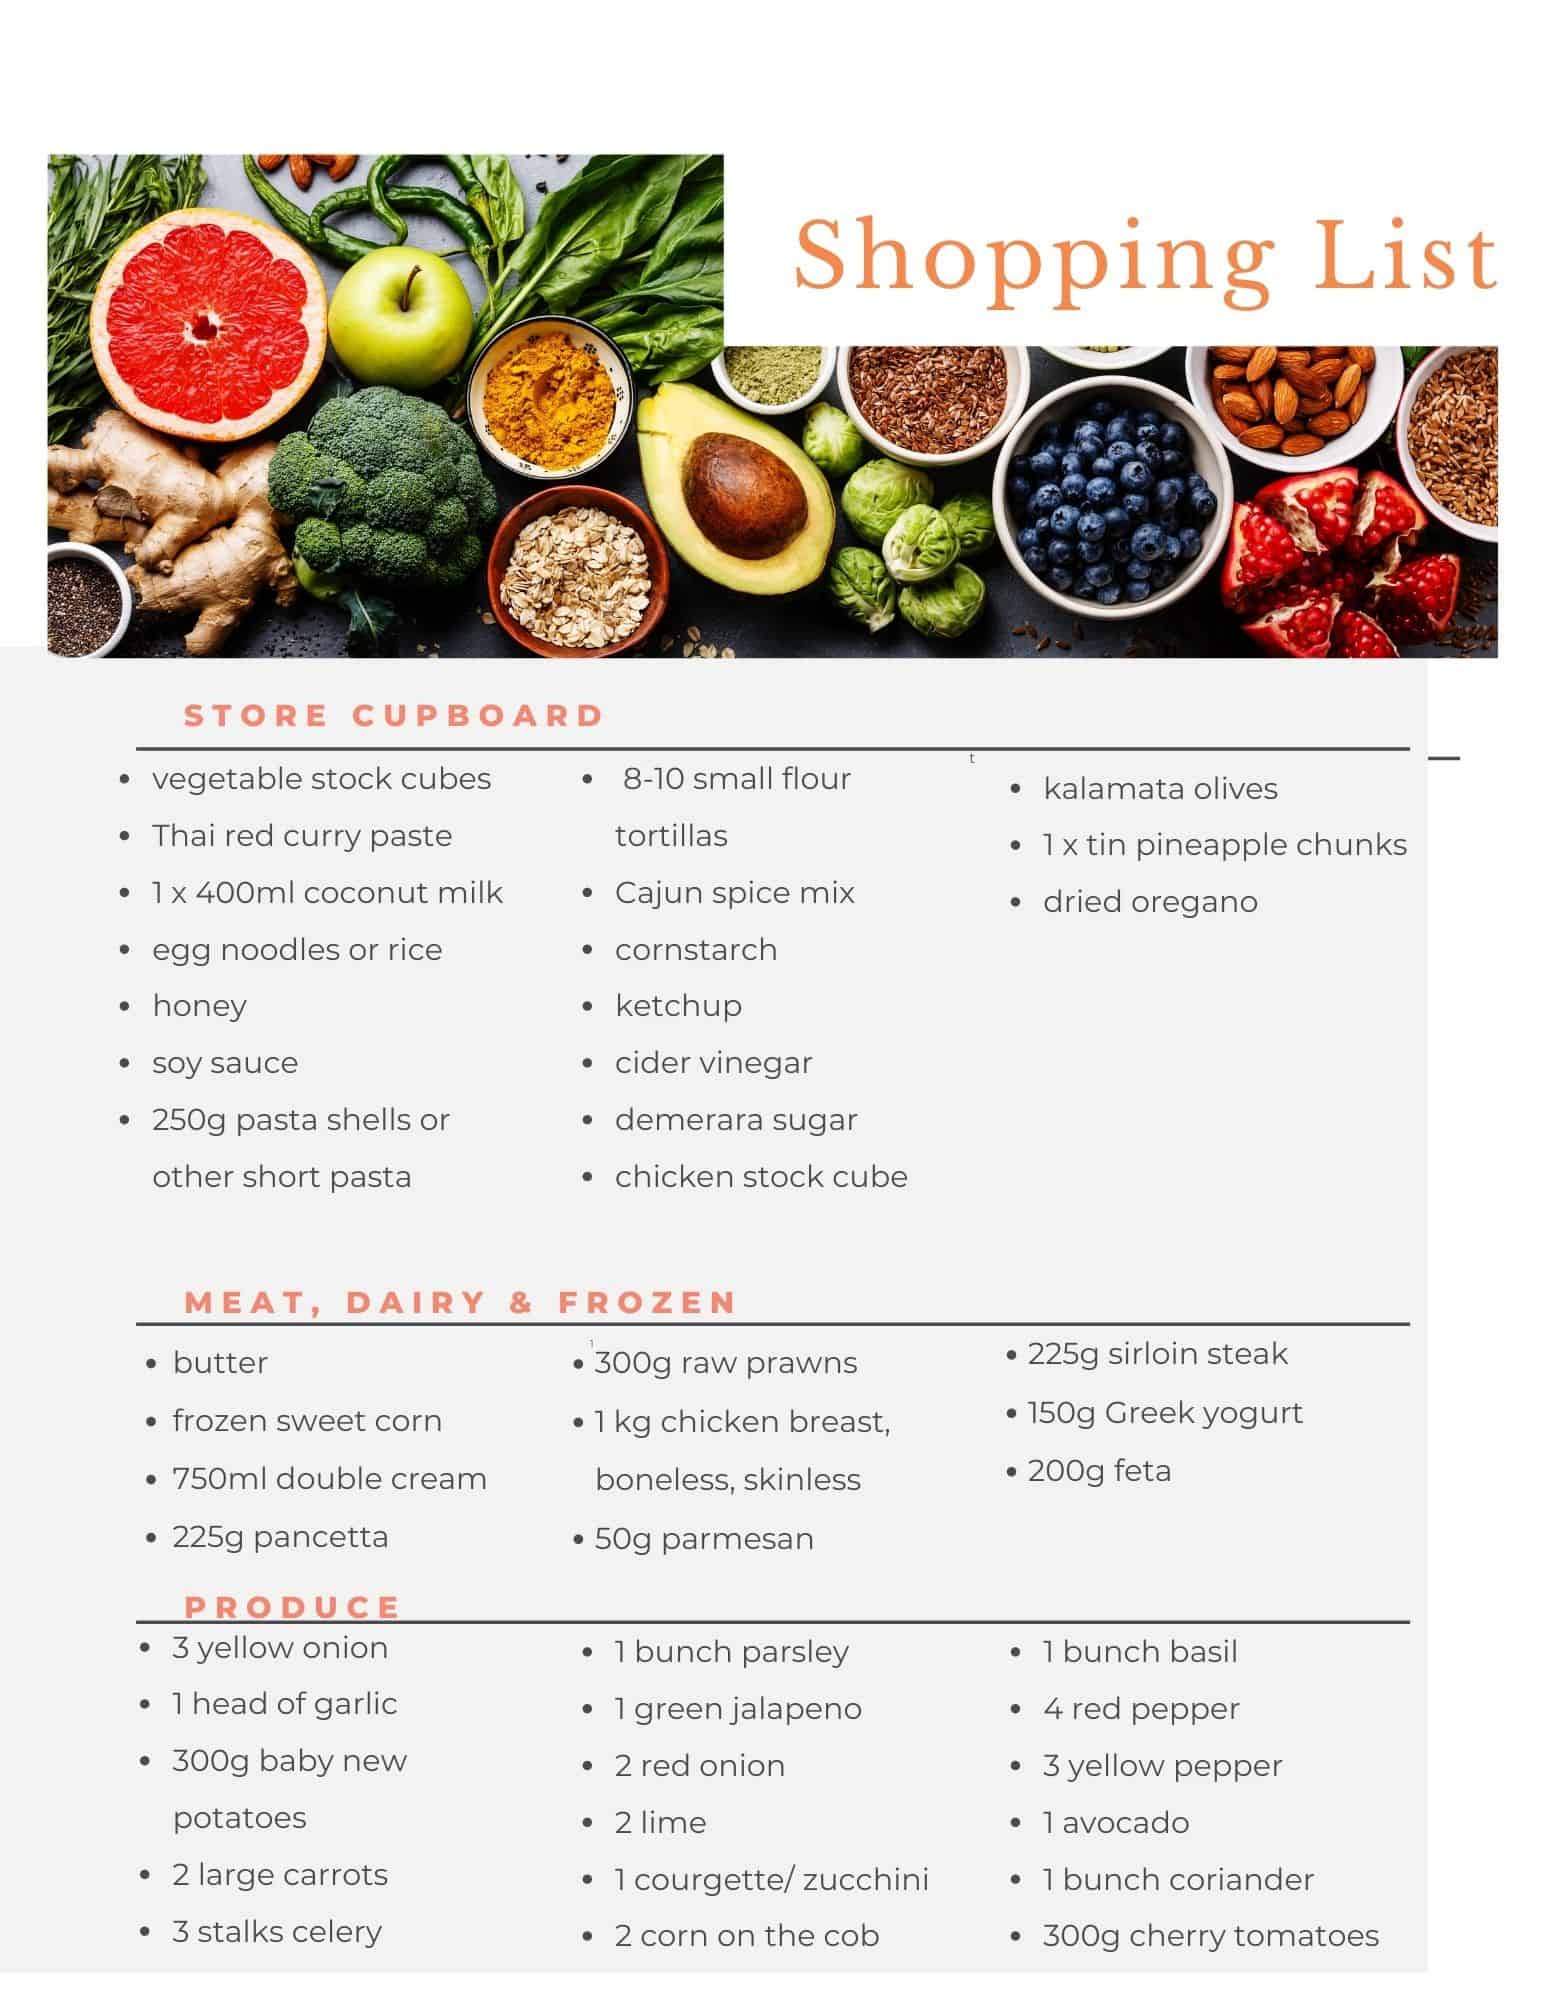 Budget meal planner shopping list.